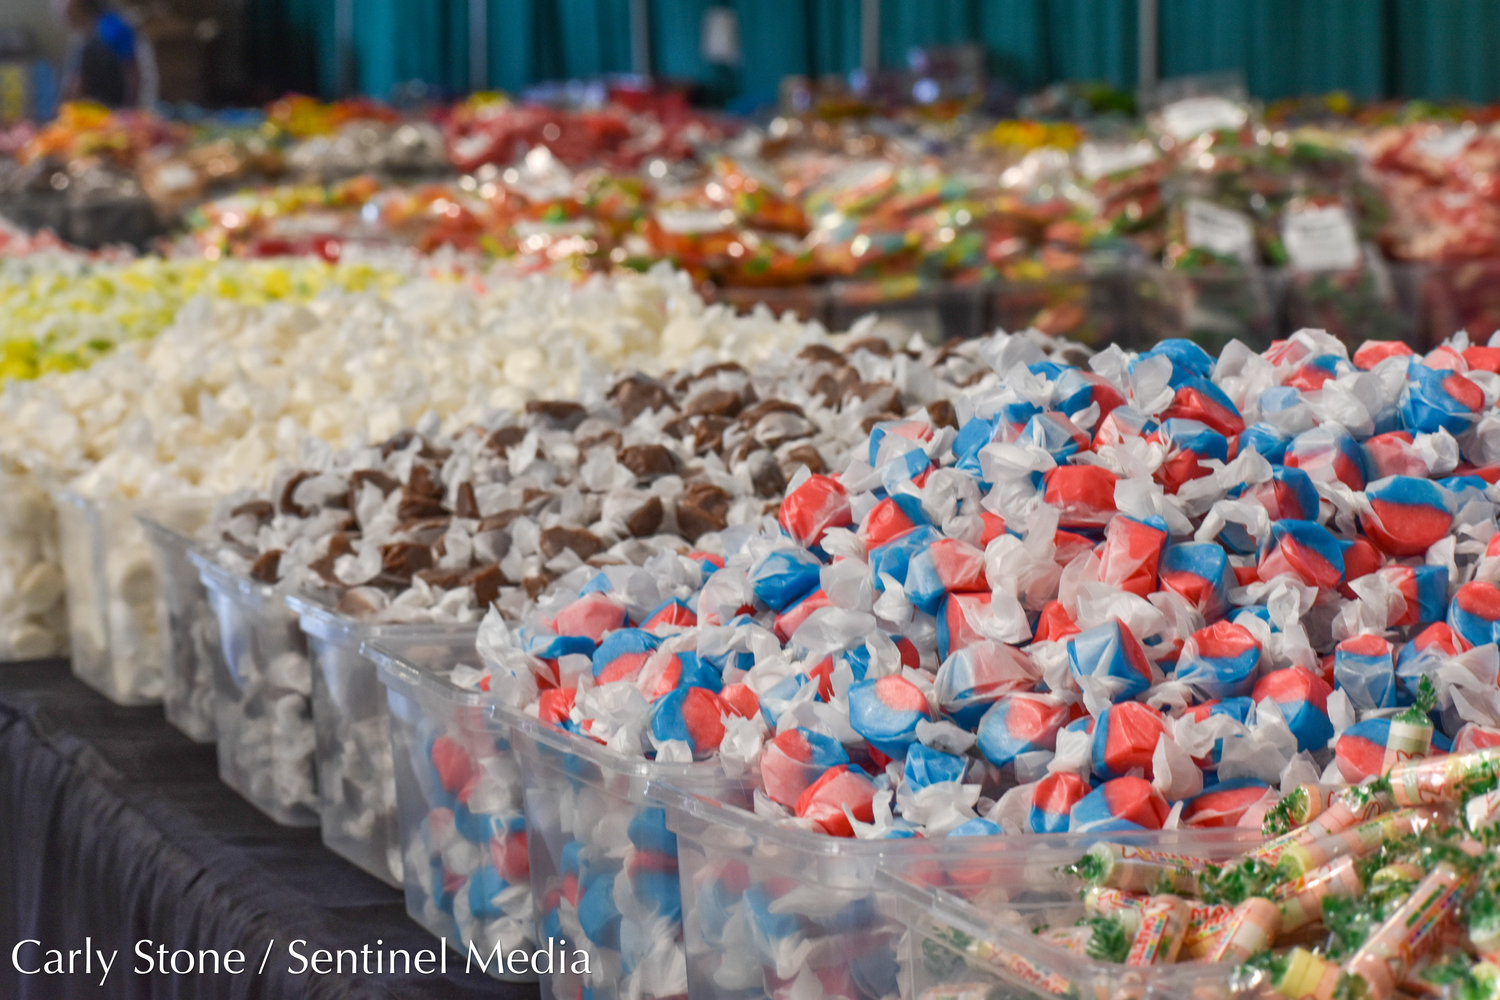 Have a sweet tooth? Consider browsing this winding row of candy at the NYS Fair.